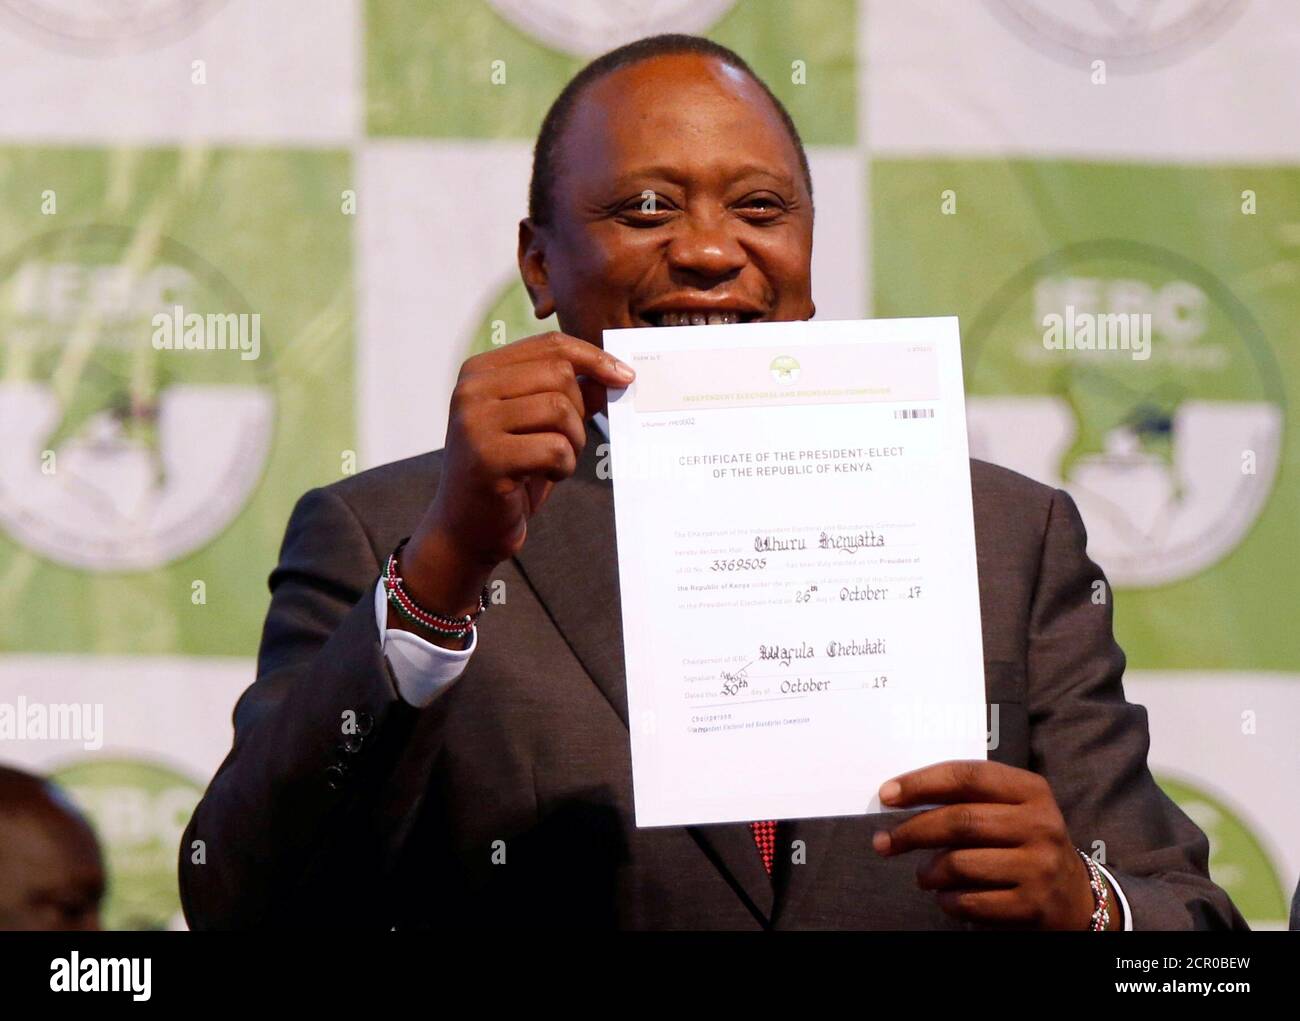 Incumbent President Uhuru Kenyatta holds the certificate of President-Elect of the Republic of Kenya after he was announced winner of the repeat presidential election at the IEBC National Tallying centre at the Bomas of Kenya, in Nairobi, Kenya October 30, 2017. REUTERS/Thomas Mukoya TPX IMAGES OF THE DAY Stock Photo